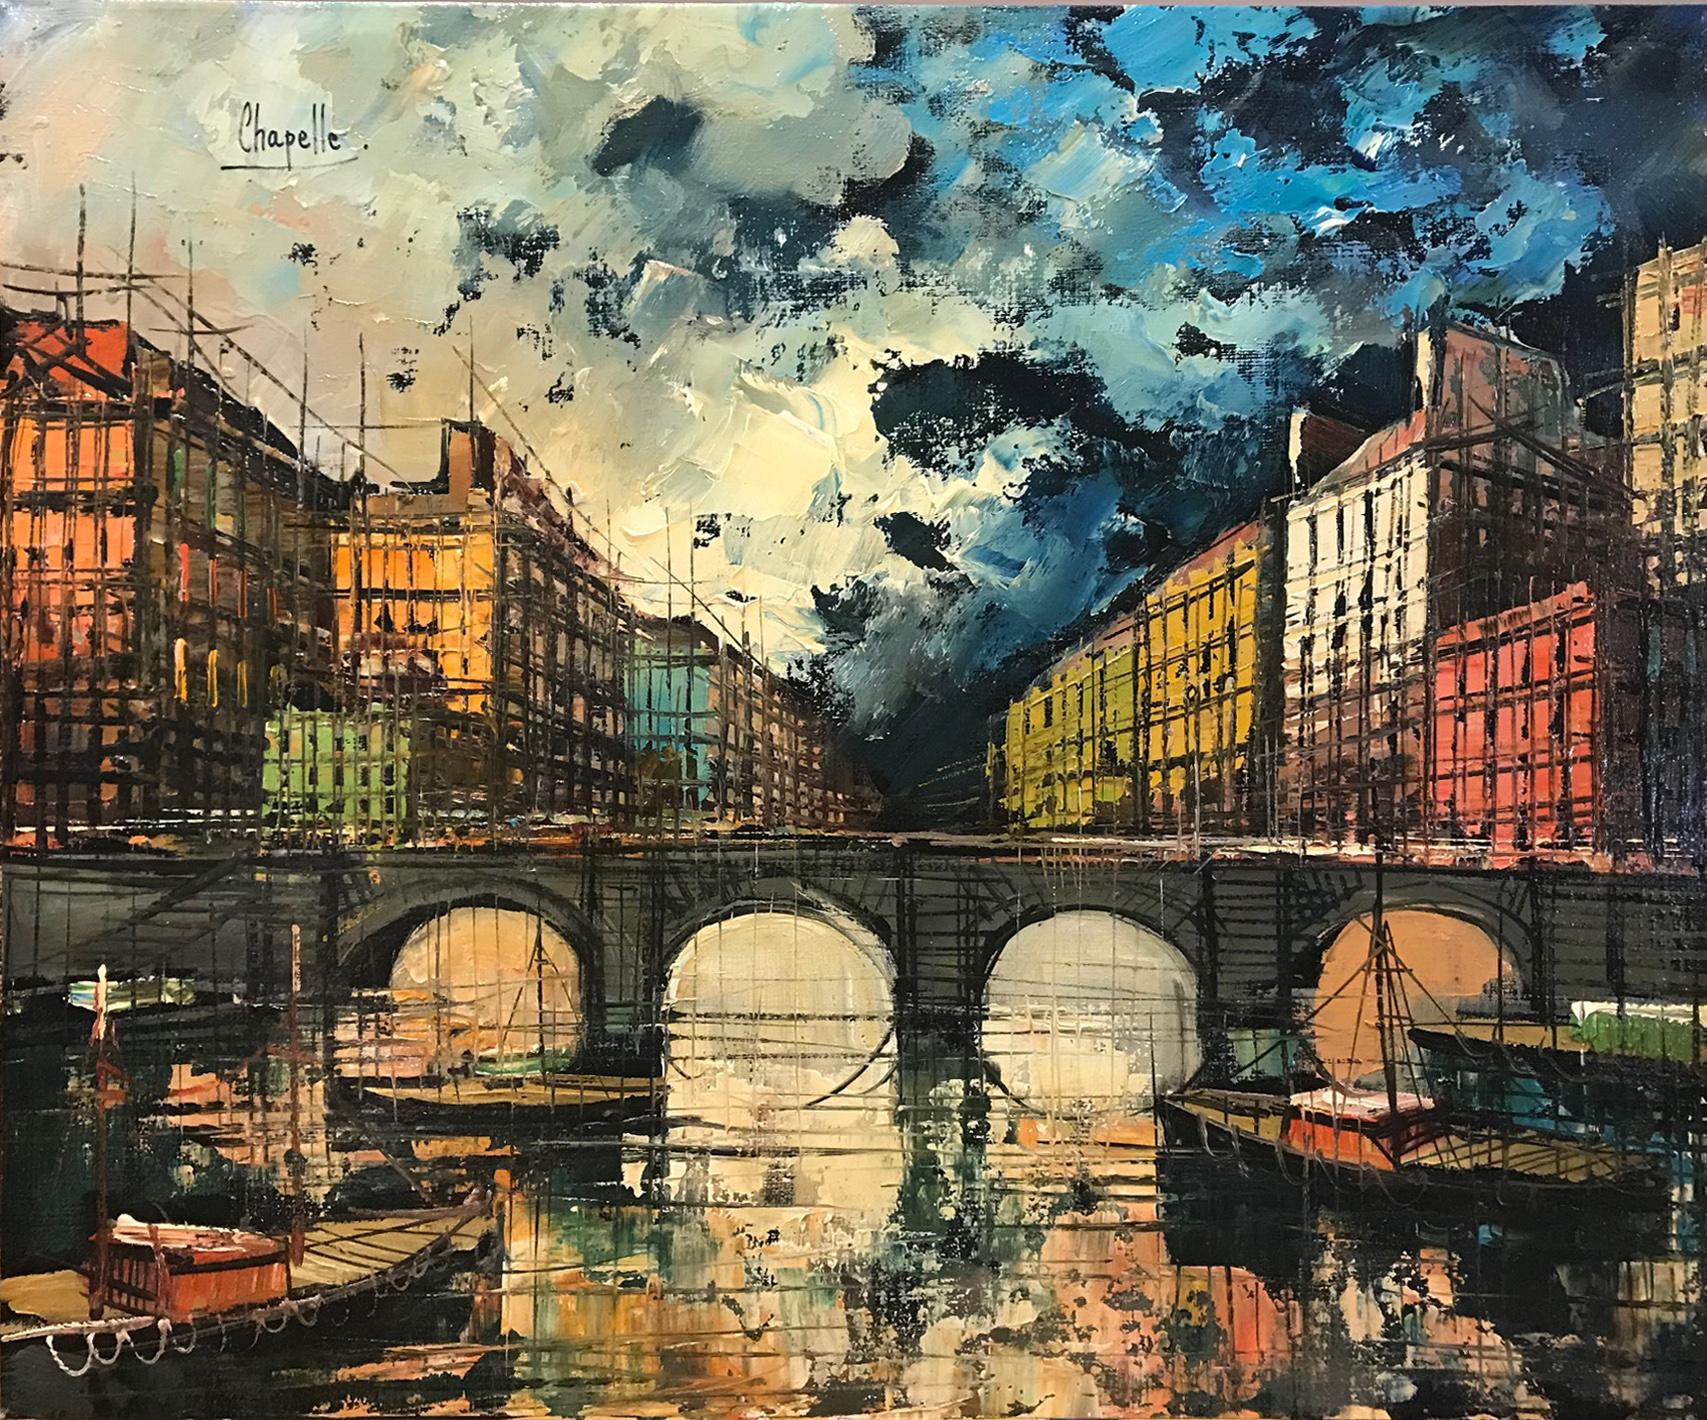 A painting by French artist Remi Chapelle, born 1969. The piece is a landscape from a series of works depicting city and canal scenes and draws upon the style of the early 20th-century Expressionist movement, utilizing vibrant colors to convey mood